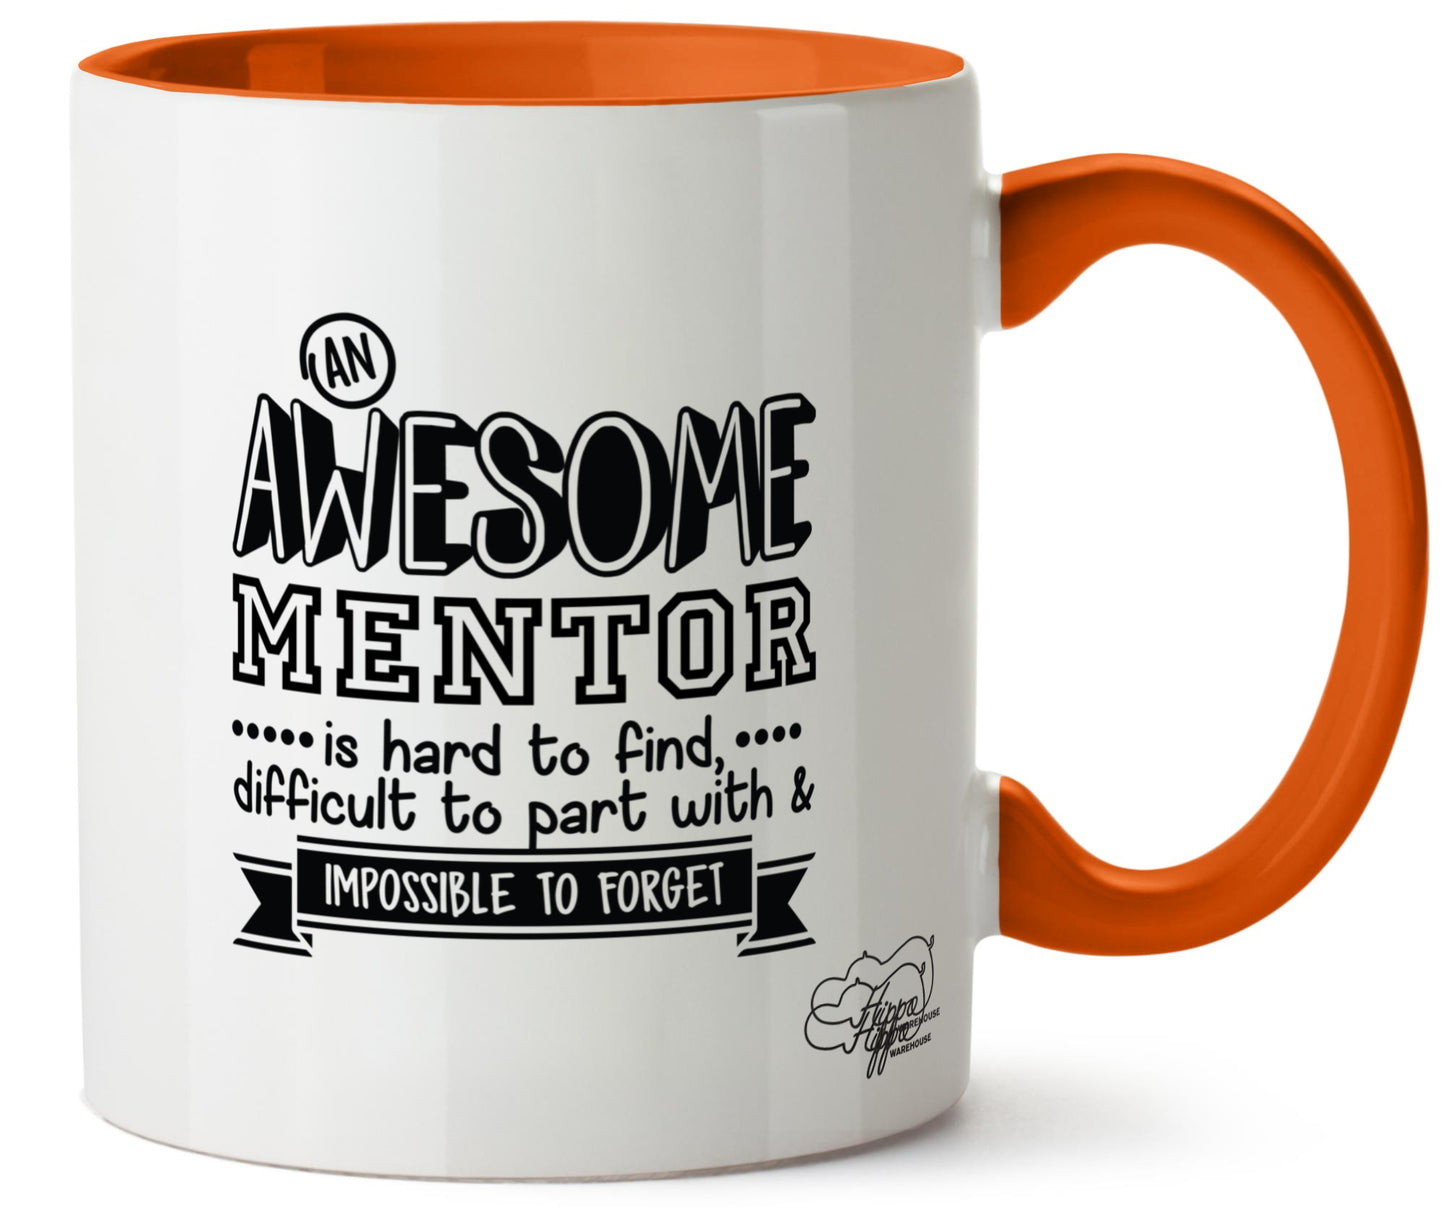 An Awesome Mentor is Hard to Find, Difficult to Part With & Impossible to Forget Printed 11oz Mug